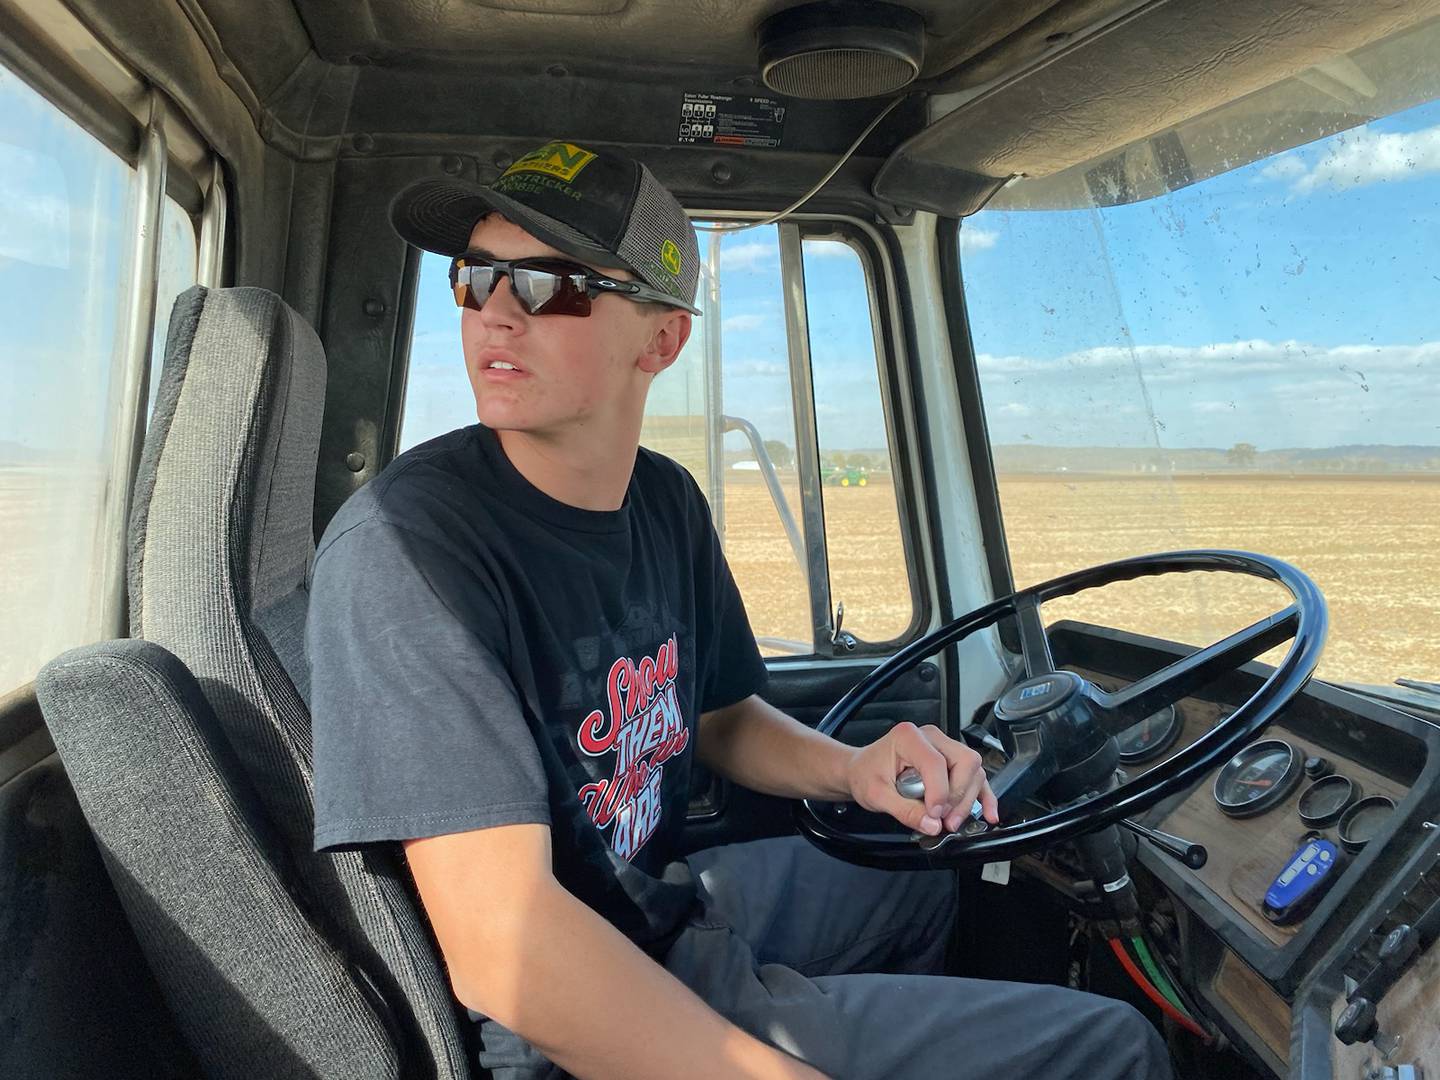 Brady Heins works on his family farm with several family members and does a variety of tasks involved with raising crops including operating machinery.